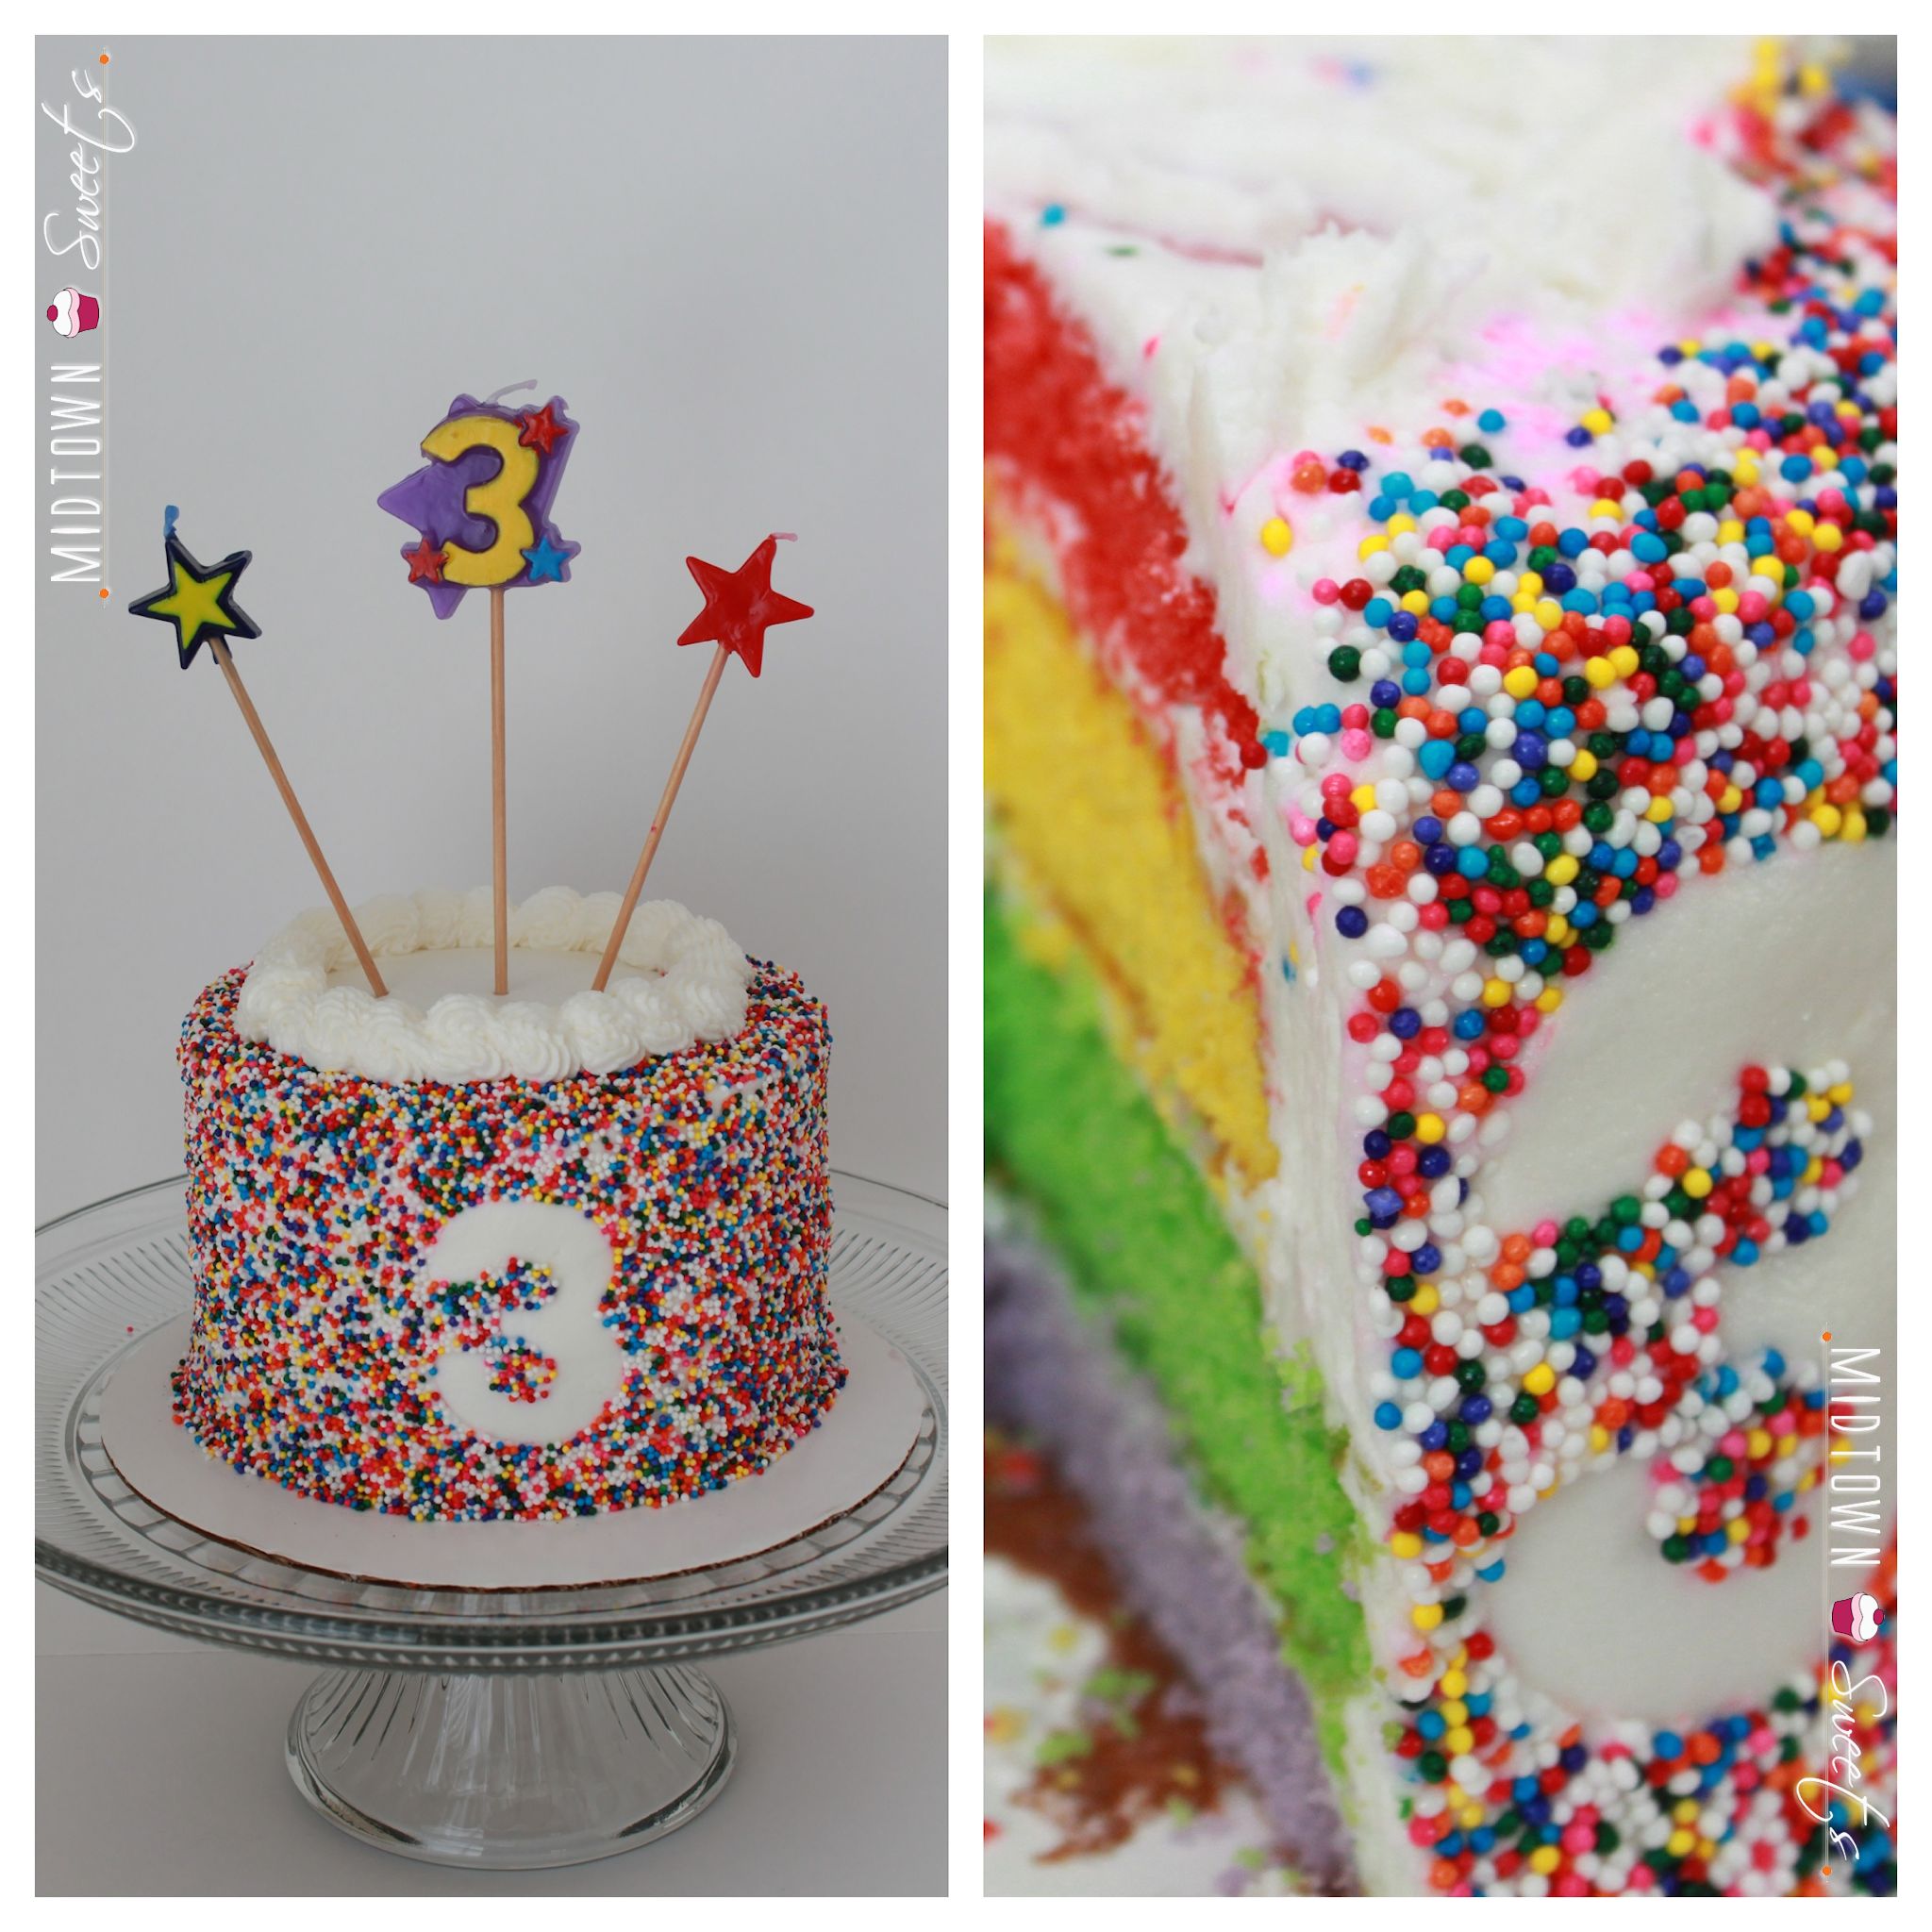 Midtown Sweets | Rainbow Layer Cake with Sprinkles